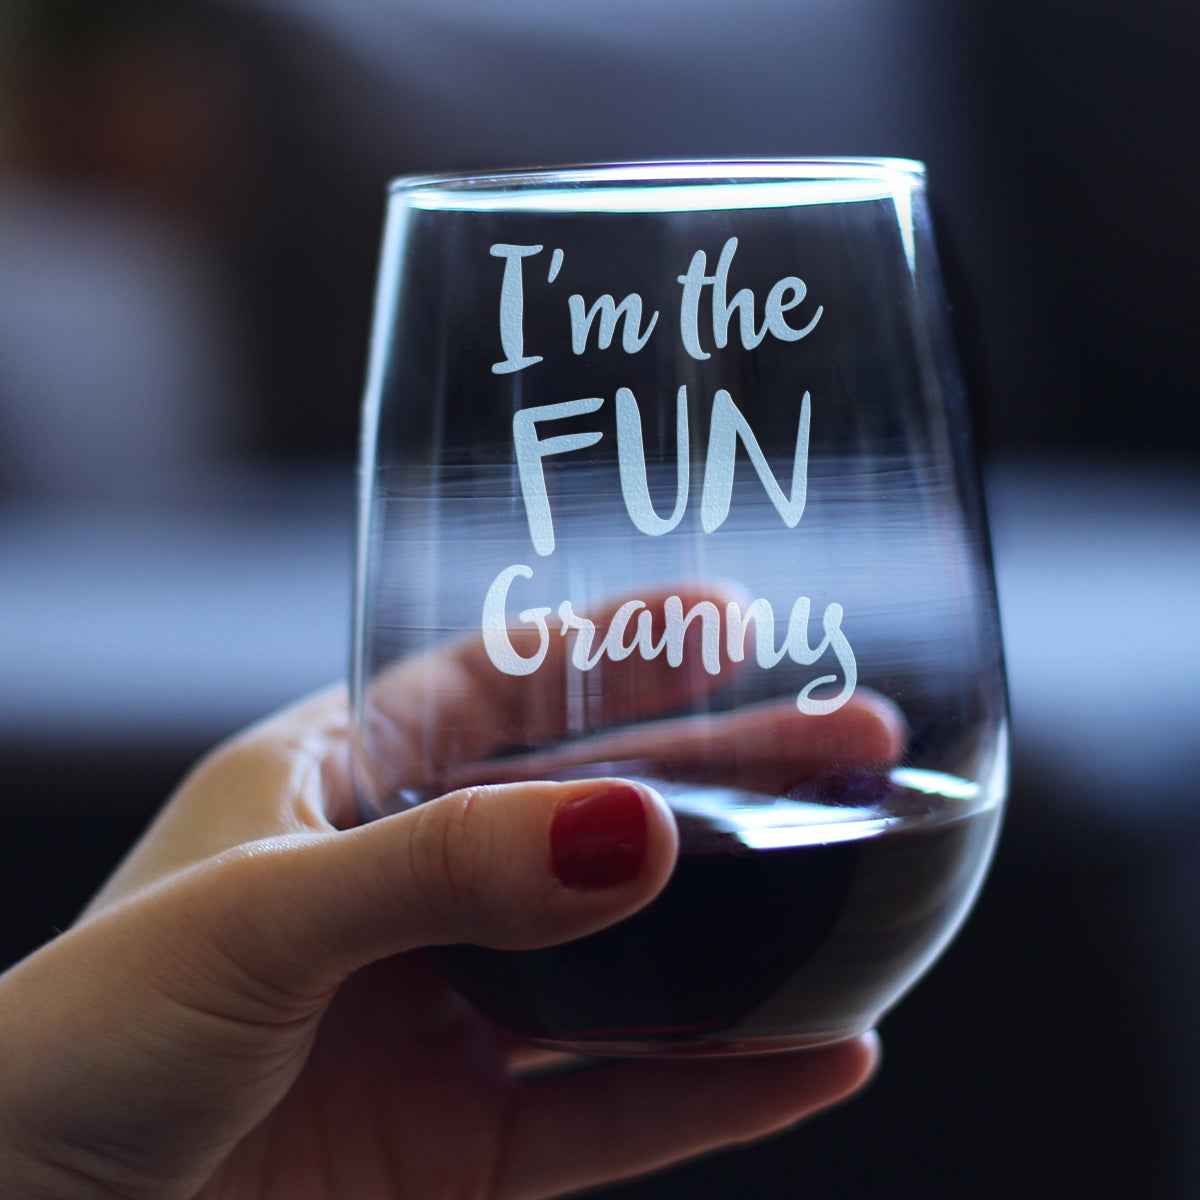 I&#39;m the Fun Granny Cute Funny Stemless Wine Glass, Large 17 Ounce Size, Etched Sayings, Gift